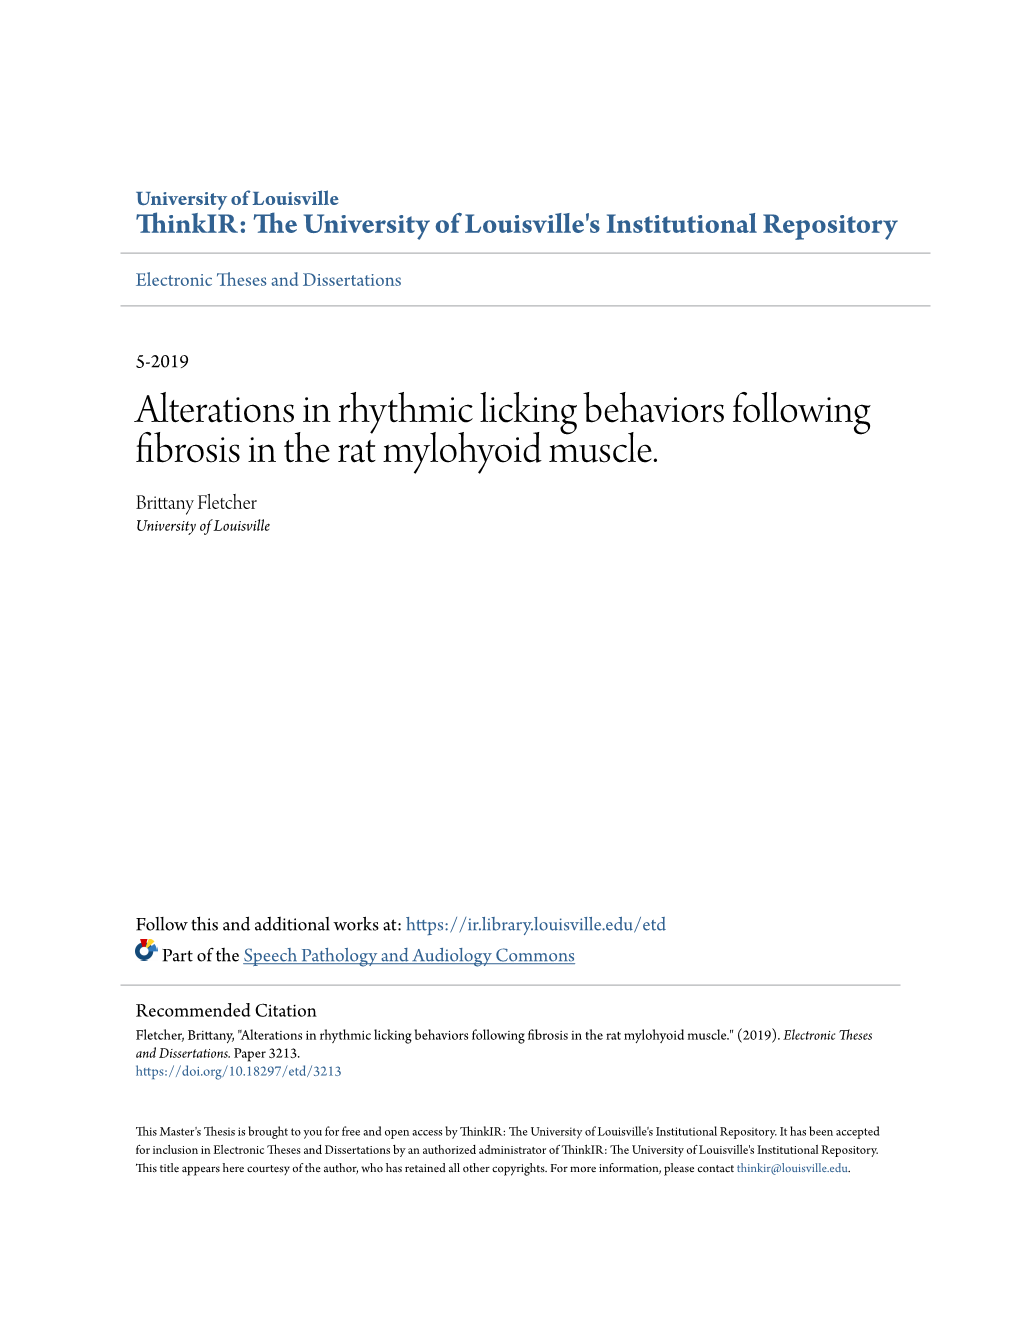 Alterations in Rhythmic Licking Behaviors Following Fibrosis in the Rat Mylohyoid Muscle. Brittany Fletcher University of Louisville